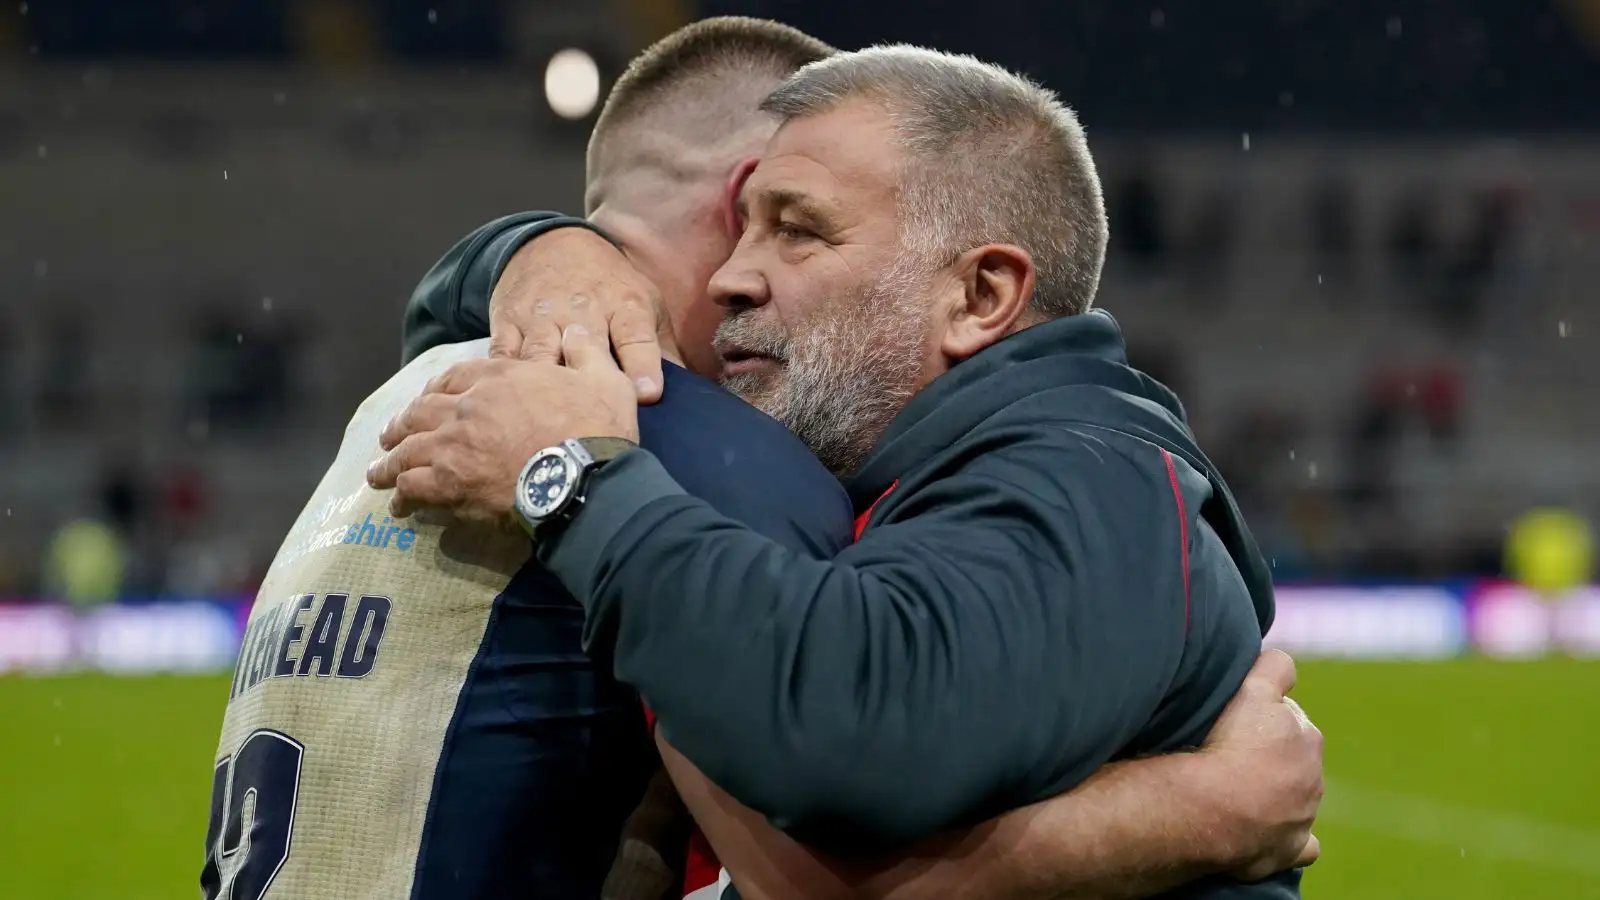 Exclusive: How tough upbringing shaped Shaun Wane as a person – and a coach